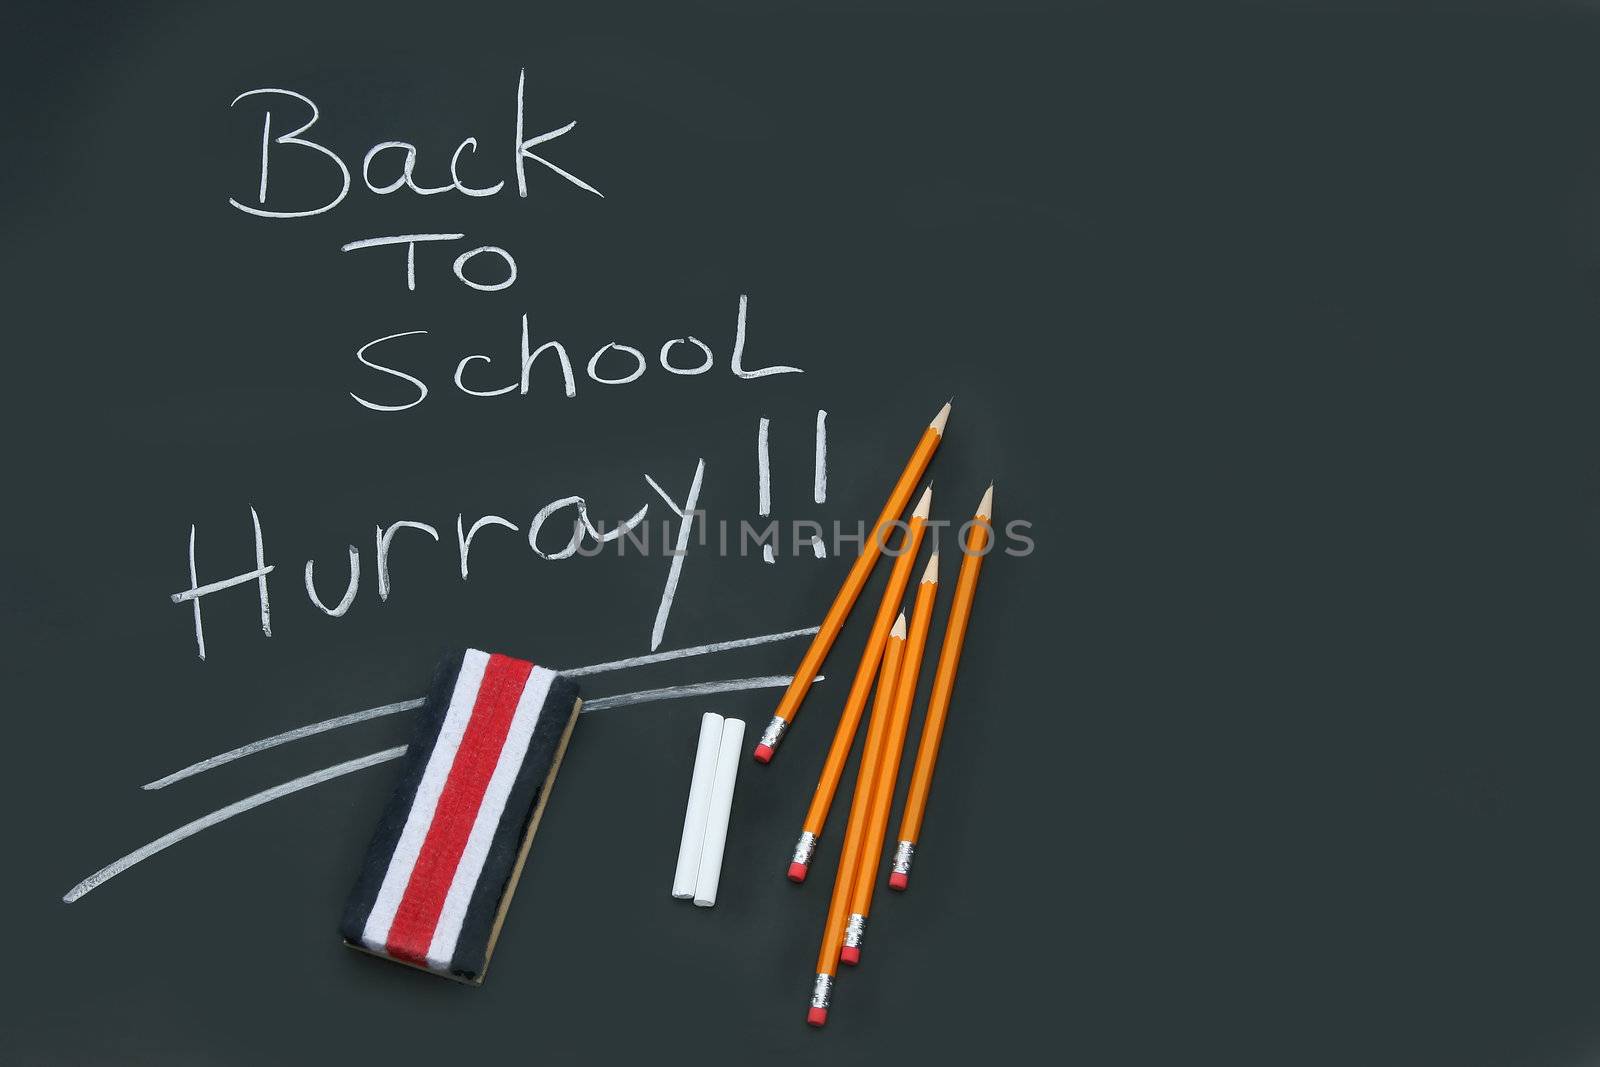 Back to school written on black chalkboard with pencils and eraser